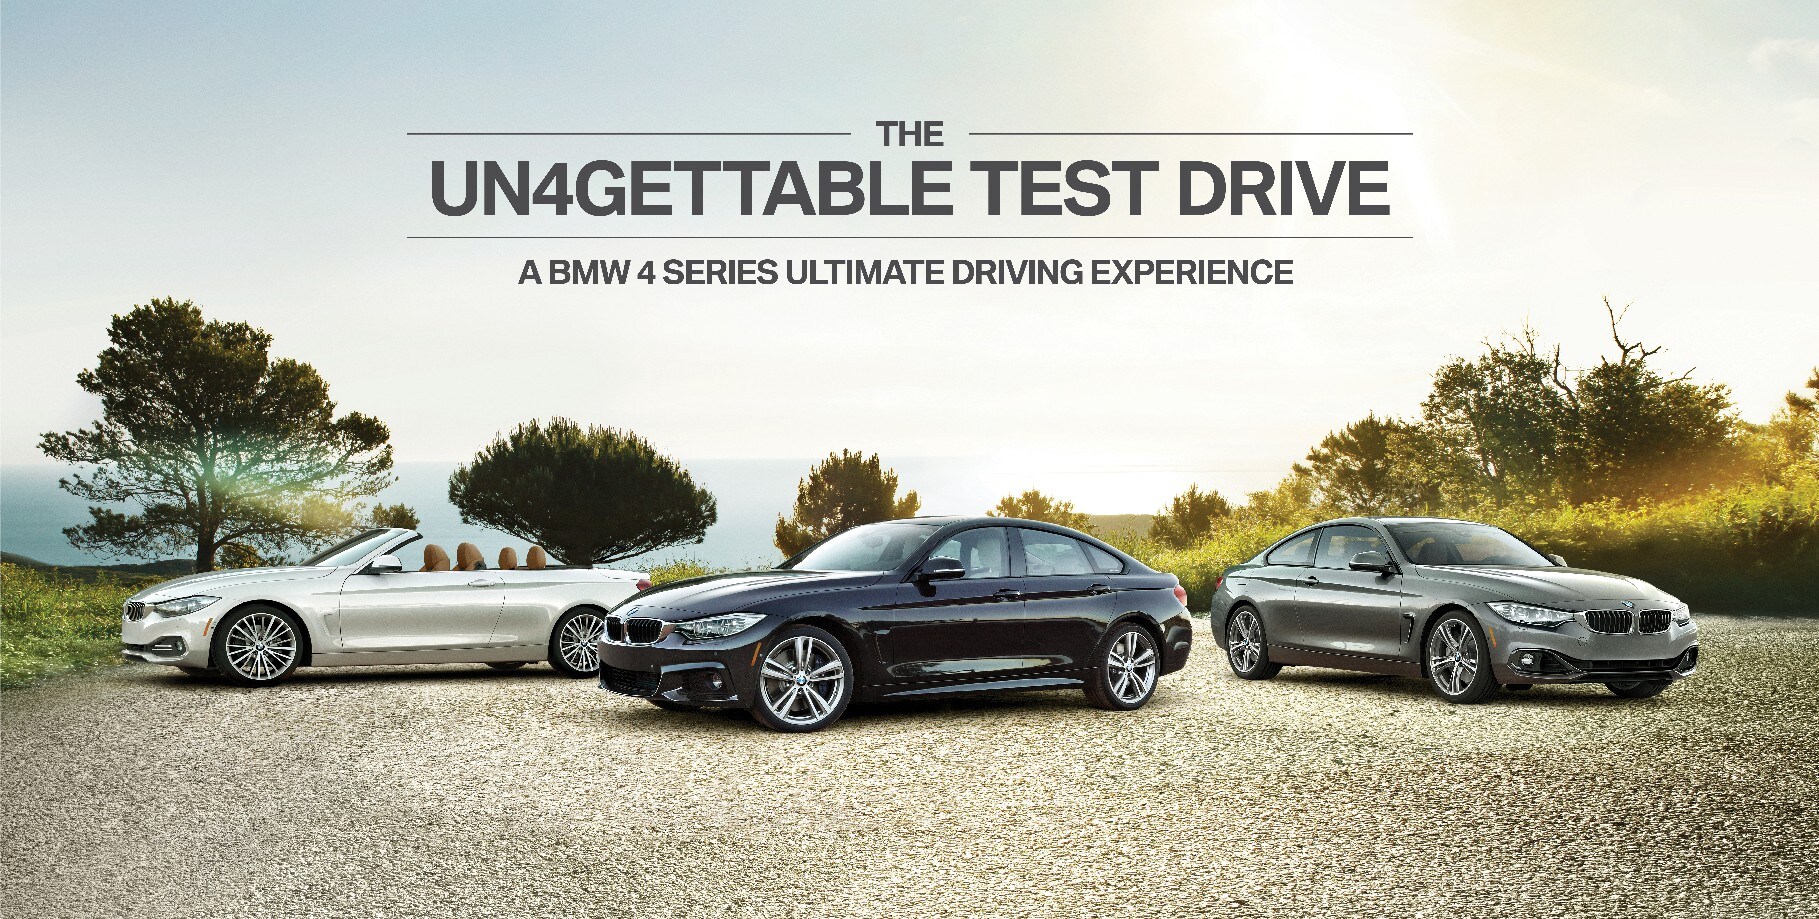 Bmw ultimate test drive event #4